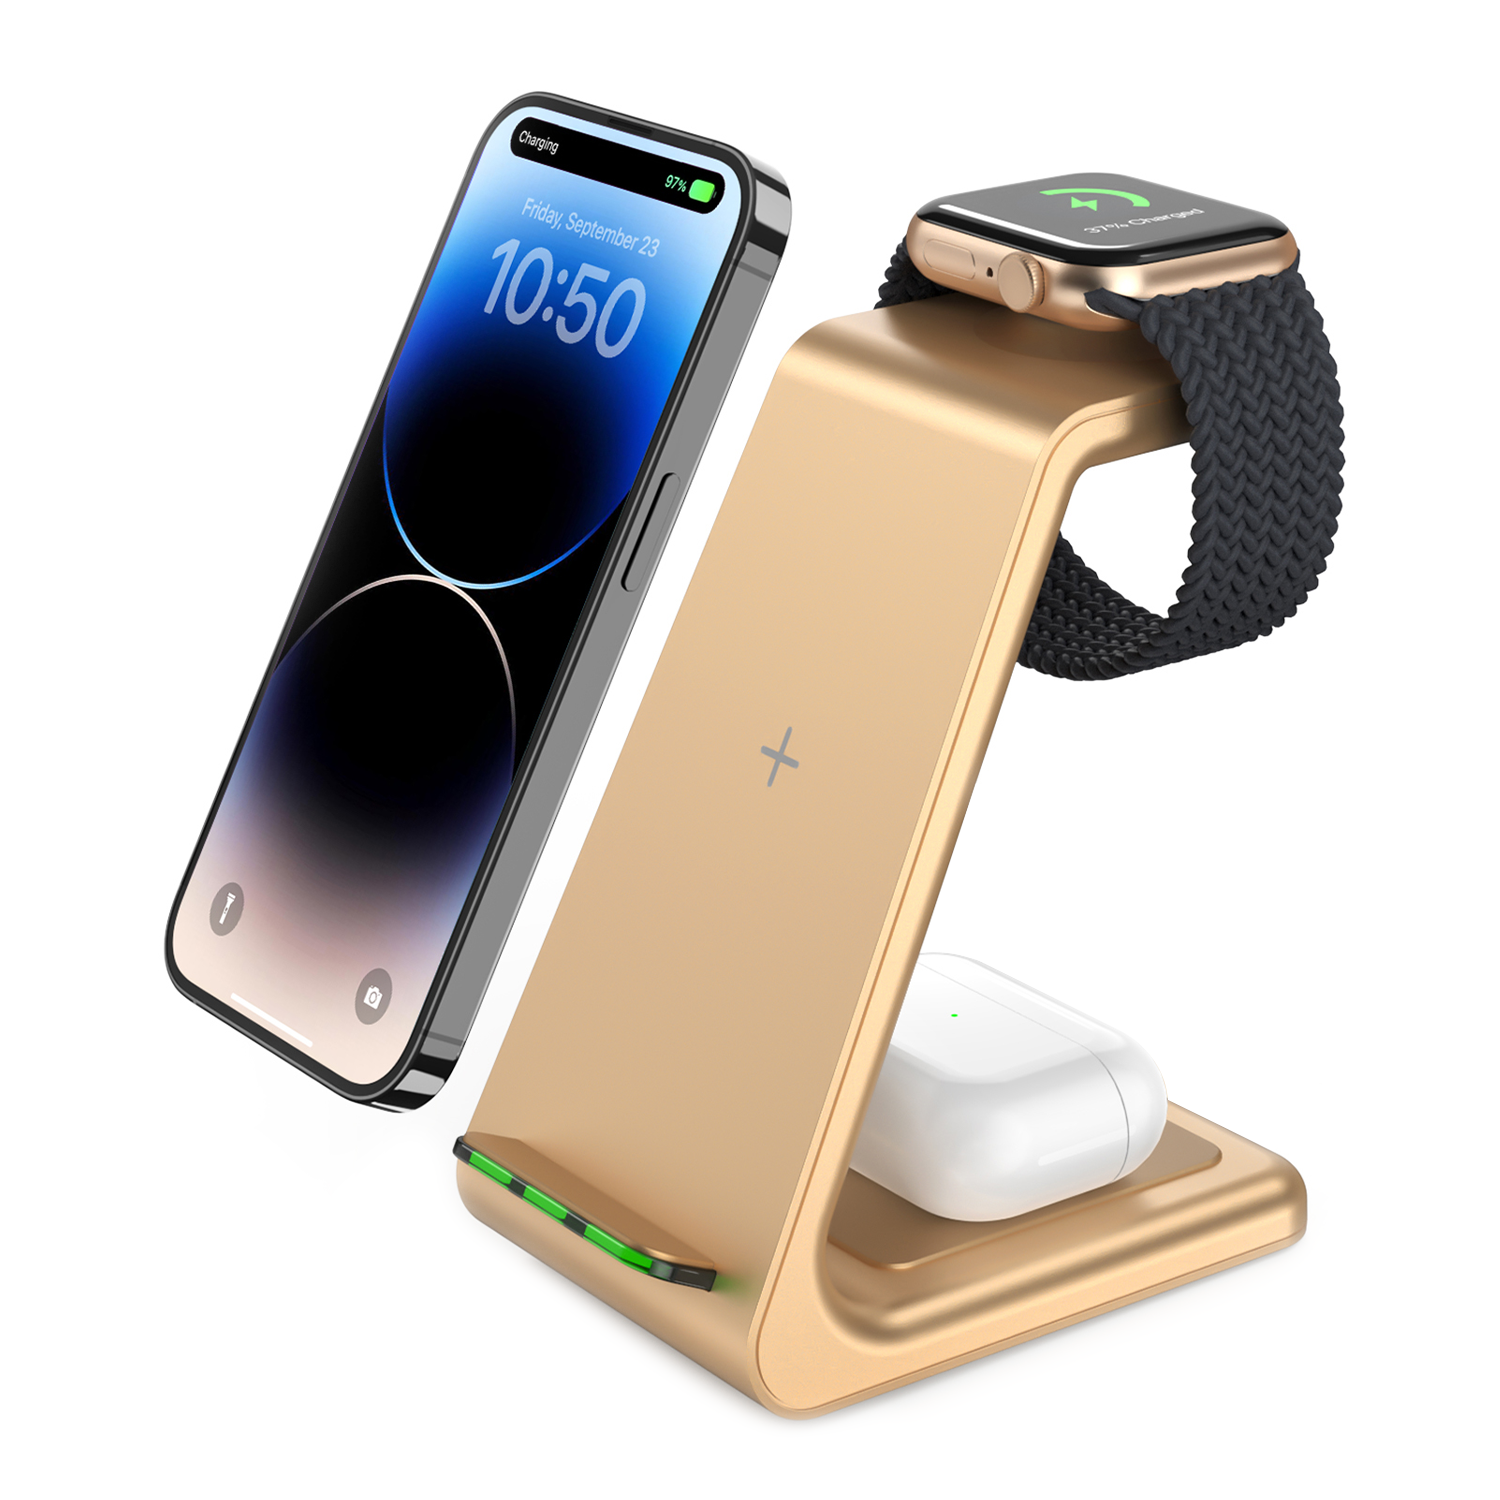 GEEKERA Wireless Charging Stand, 3 in 1 Wireless Charger Dock Station for Apple Devices